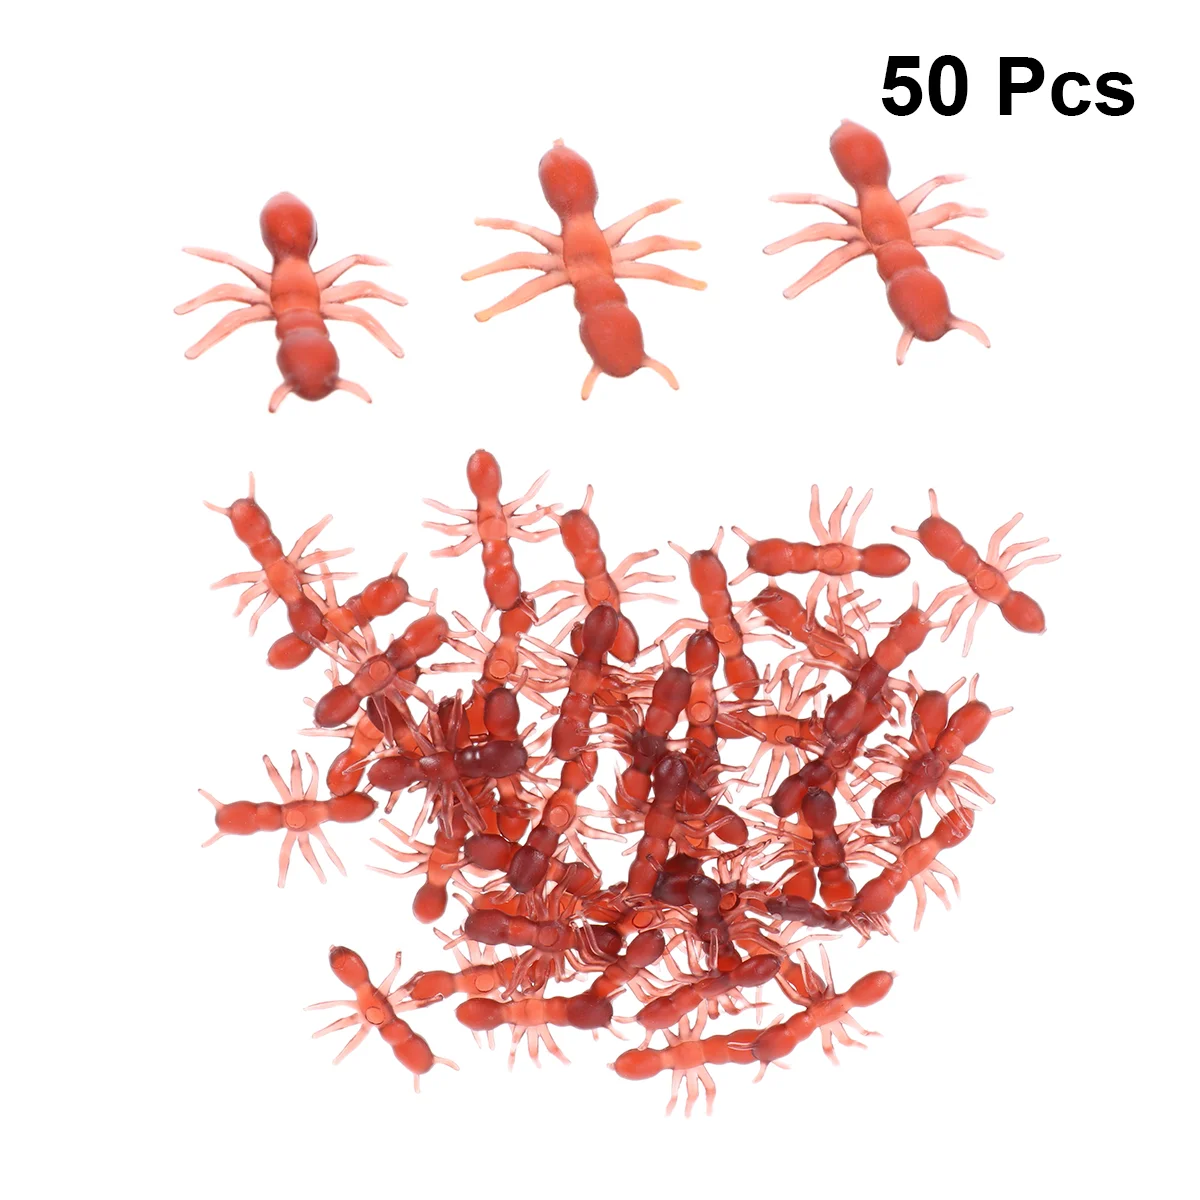 

Magiclulu Kids Toys Mini Plastic Fake Ants Halloween Simulation Colorful Scary Ant Toy Joking Halloween Party Favors